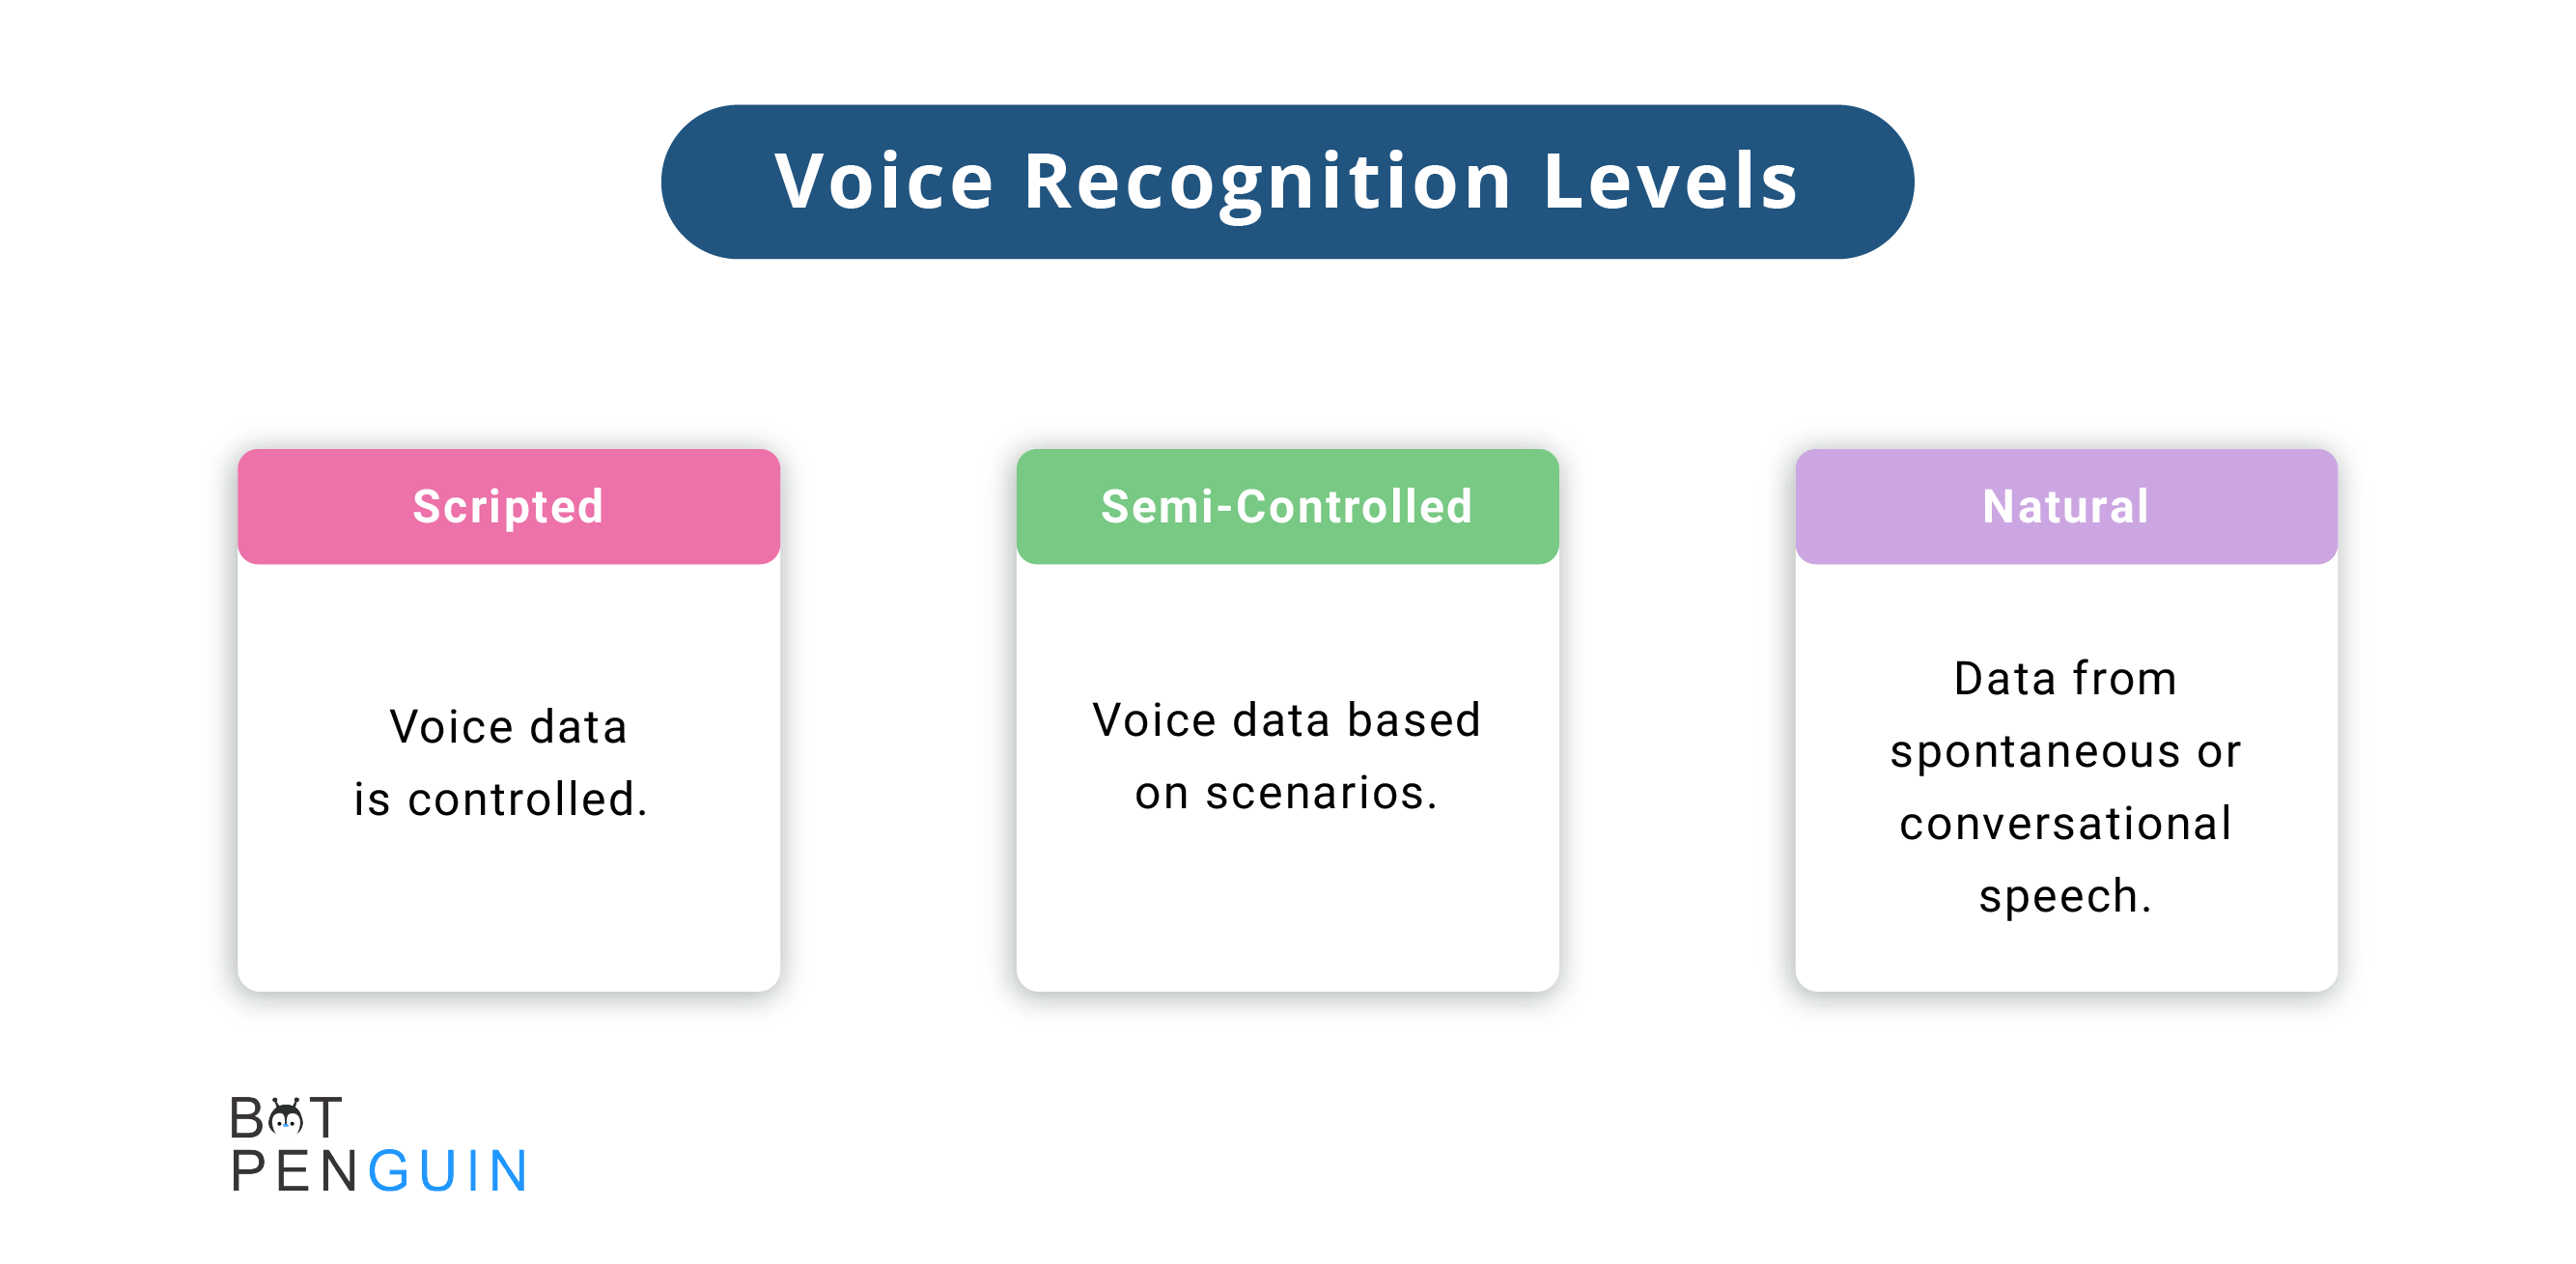 What are the three voice recognition levels?